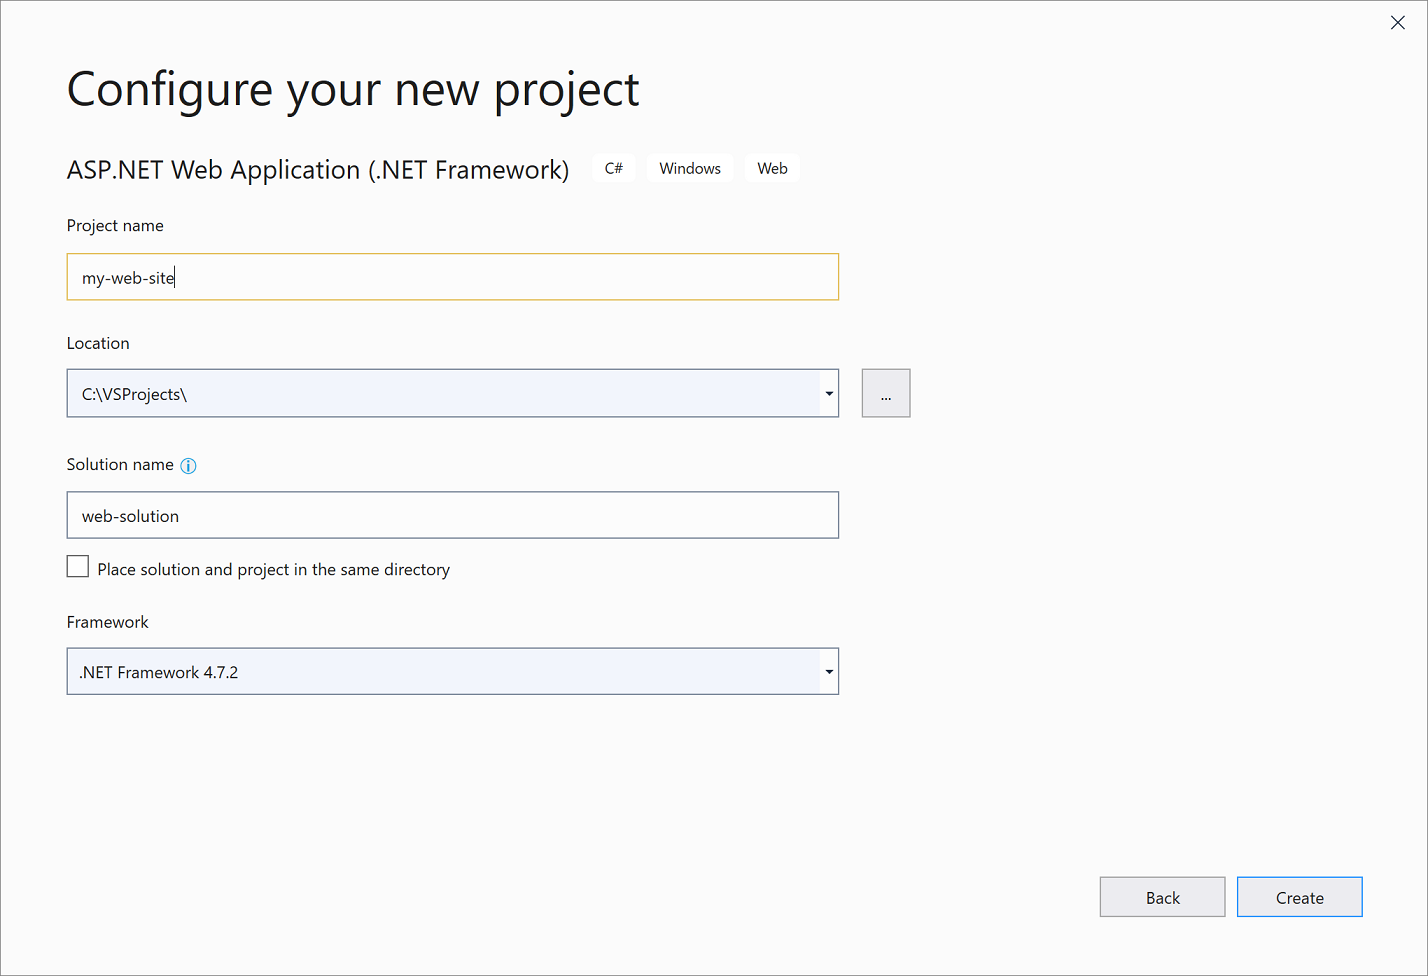 Screenshot of the 'Configure your new project' dialog in Visual Studio 2019.